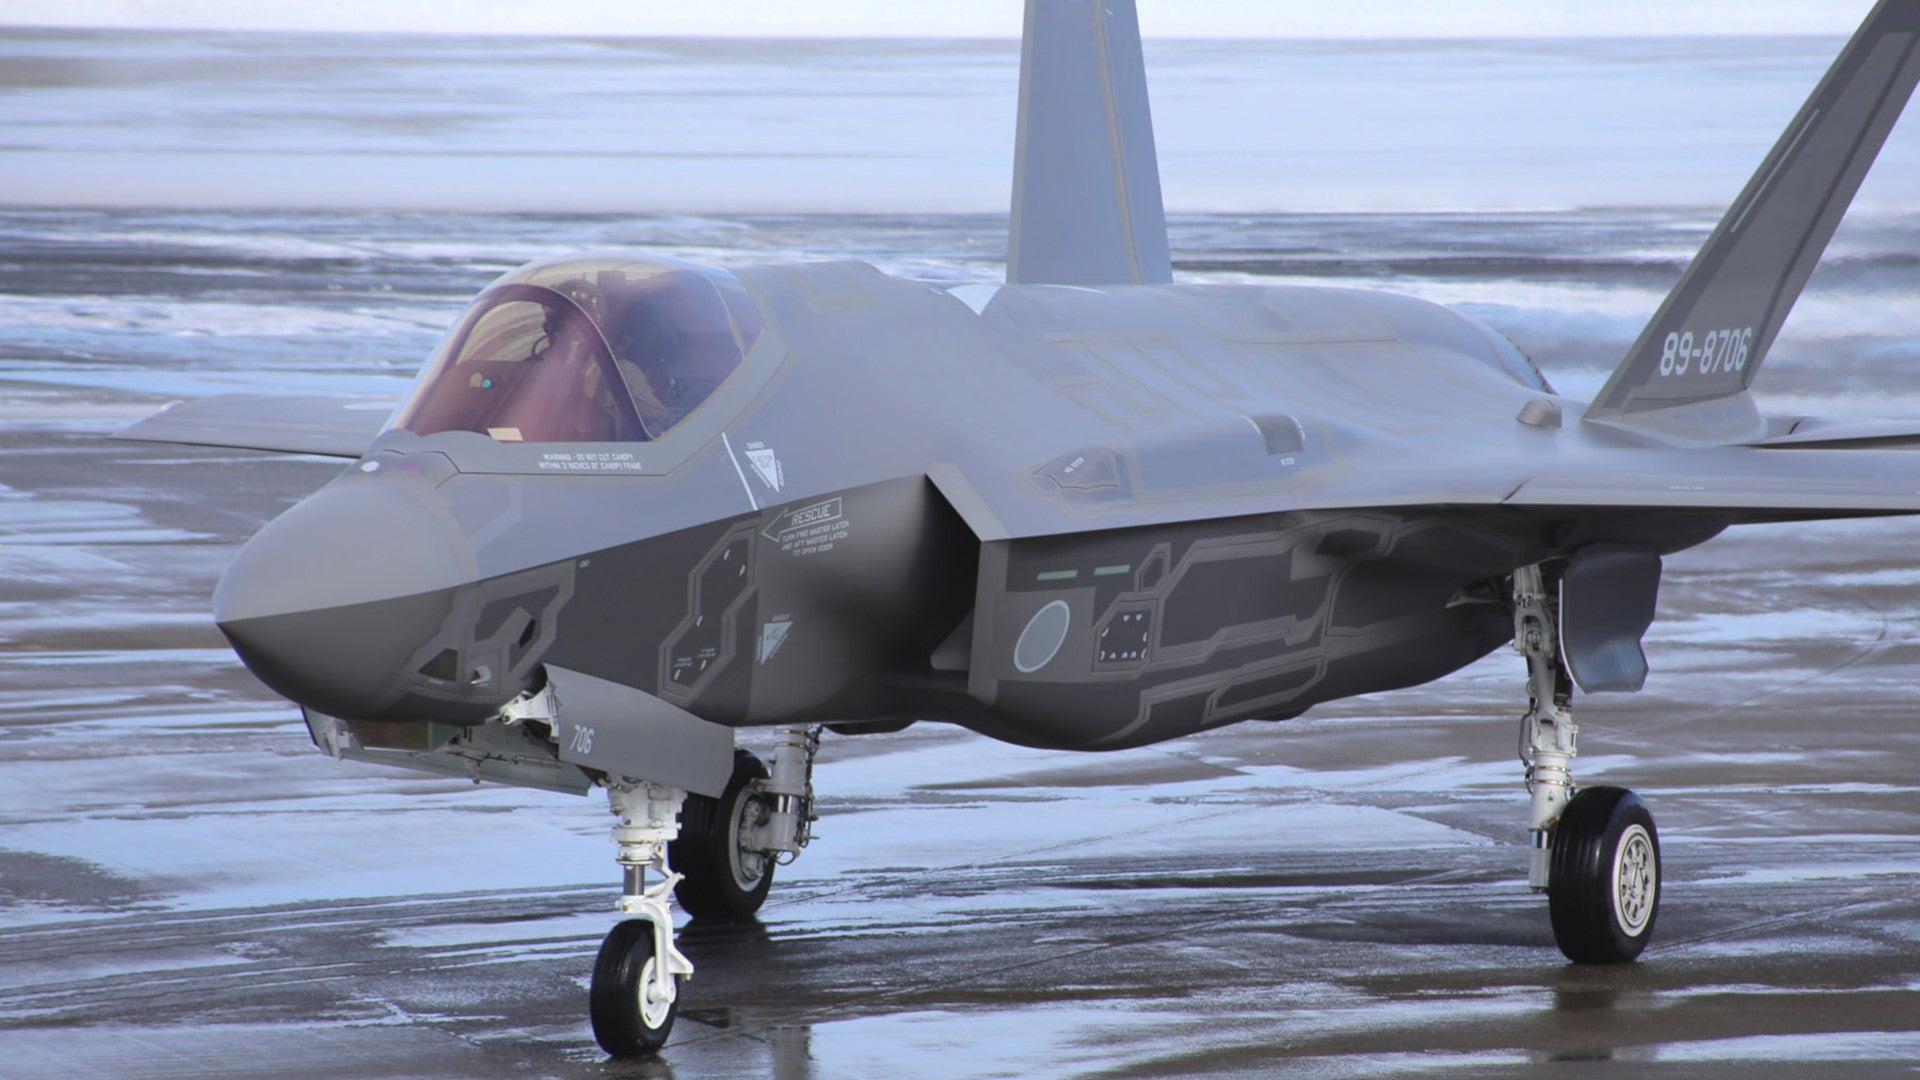 The U.S. Military Now Denies That Japan’s Missing F-35A Has Been Found